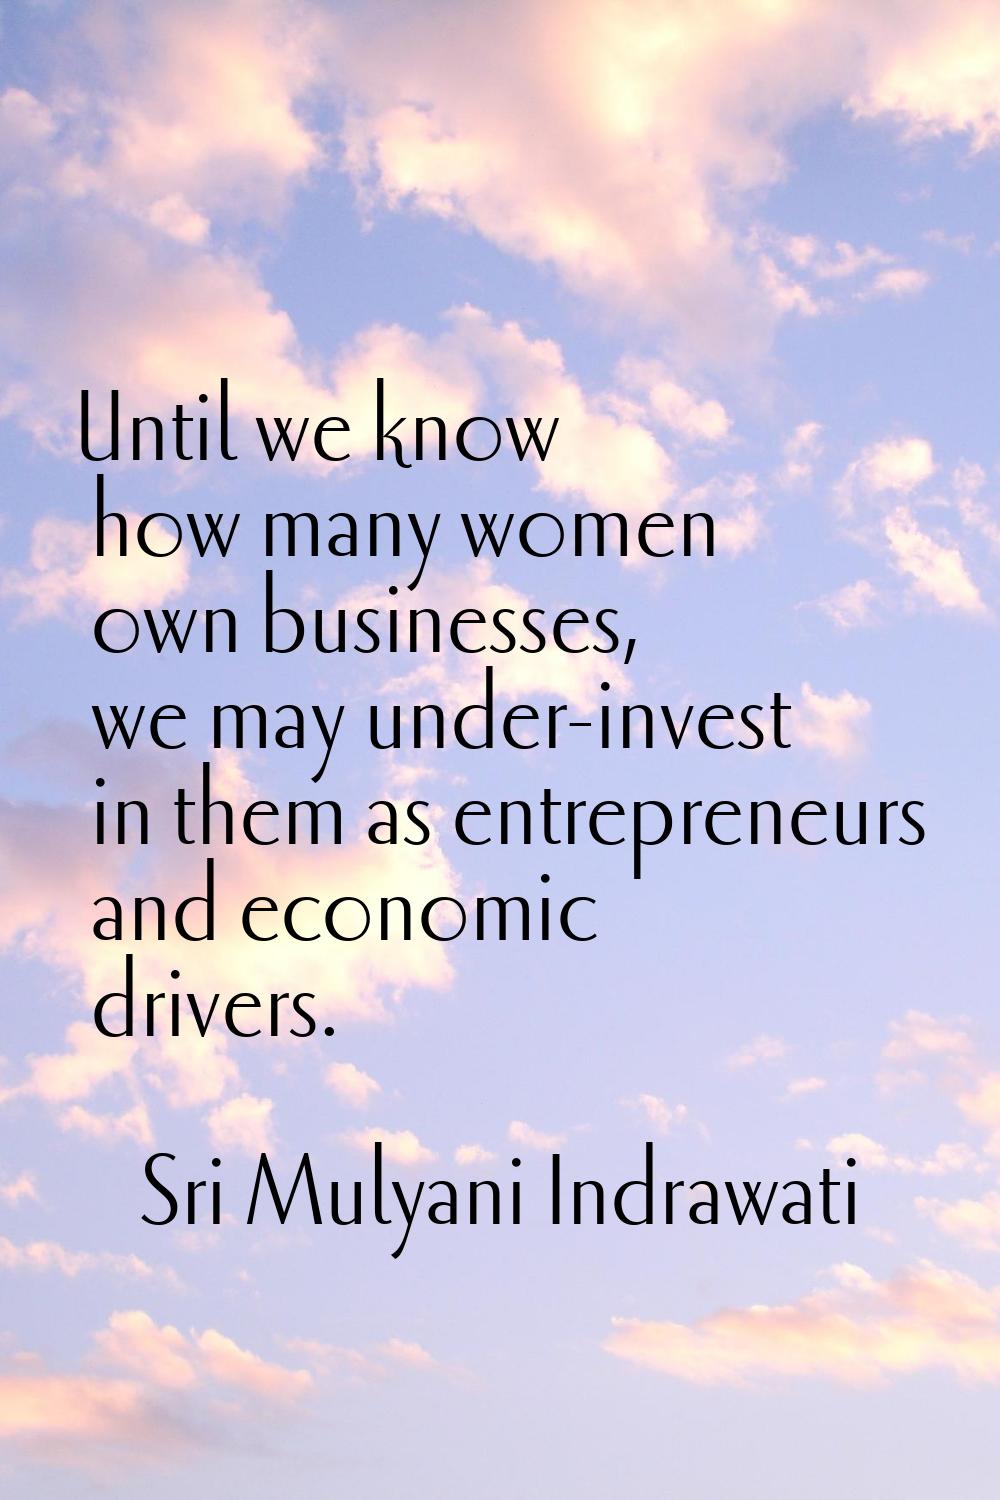 Until we know how many women own businesses, we may under-invest in them as entrepreneurs and econo